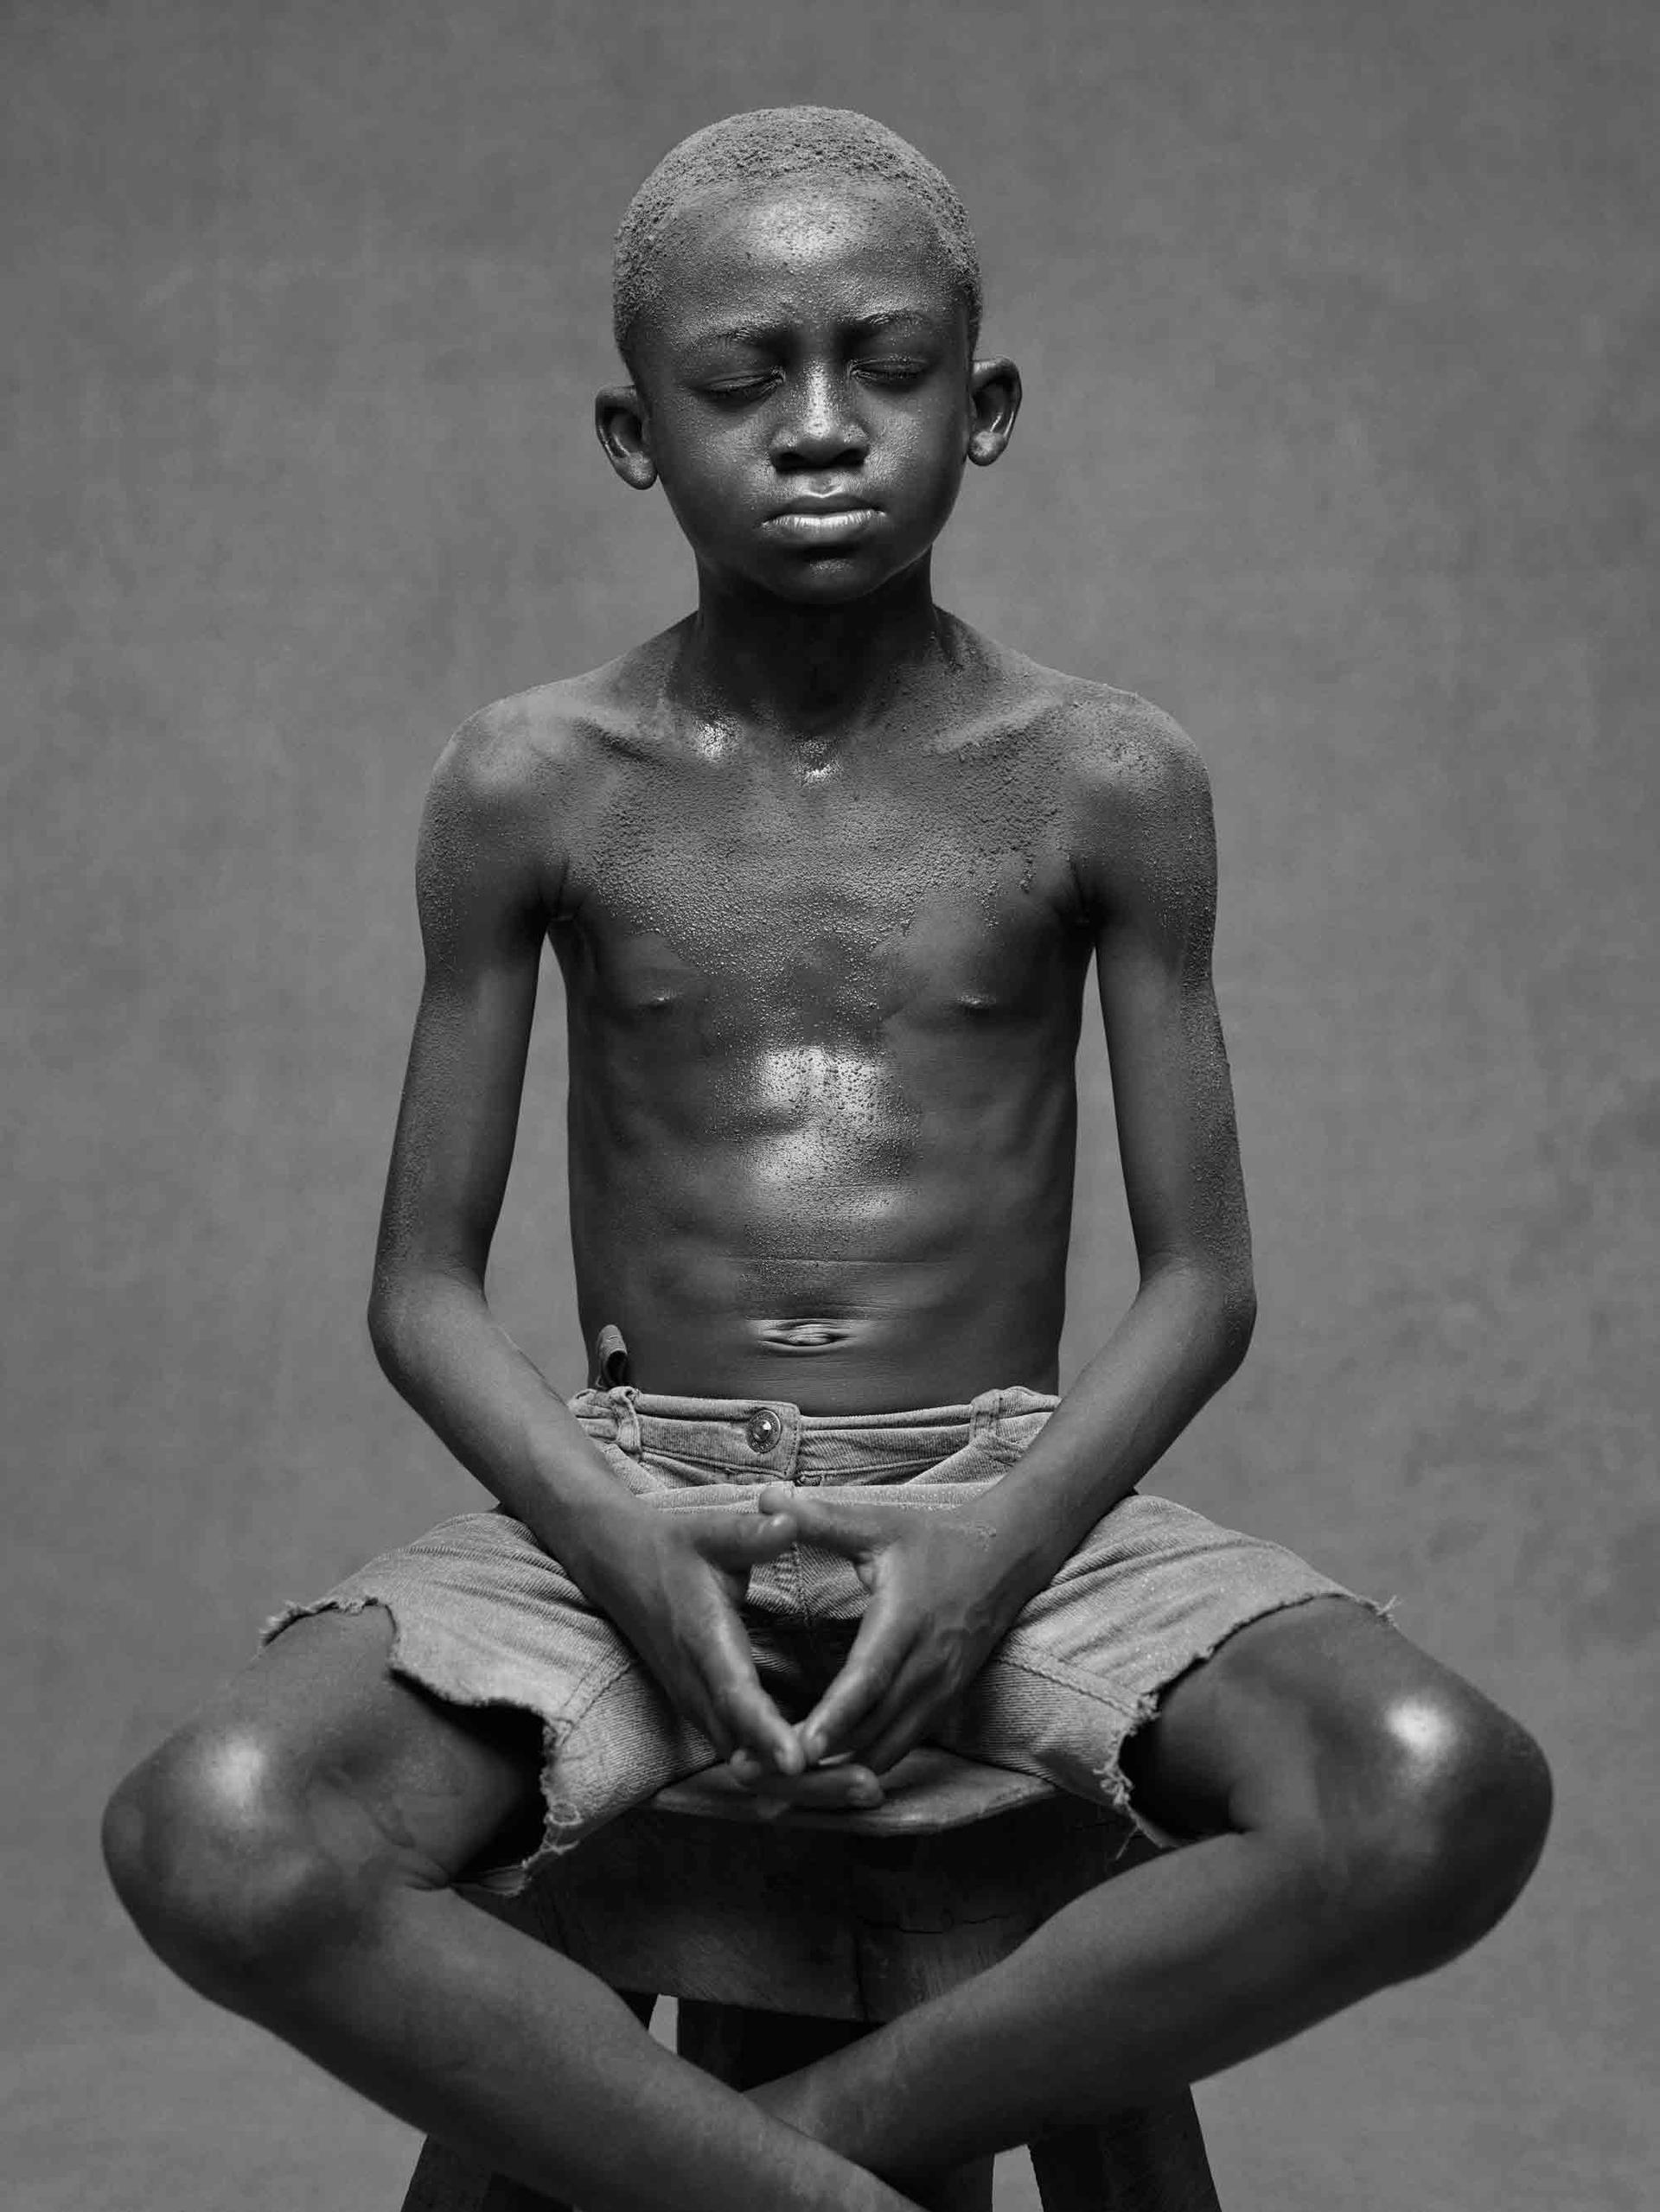 A boy poses for a photograph with his fingers touching and his ankles crossed